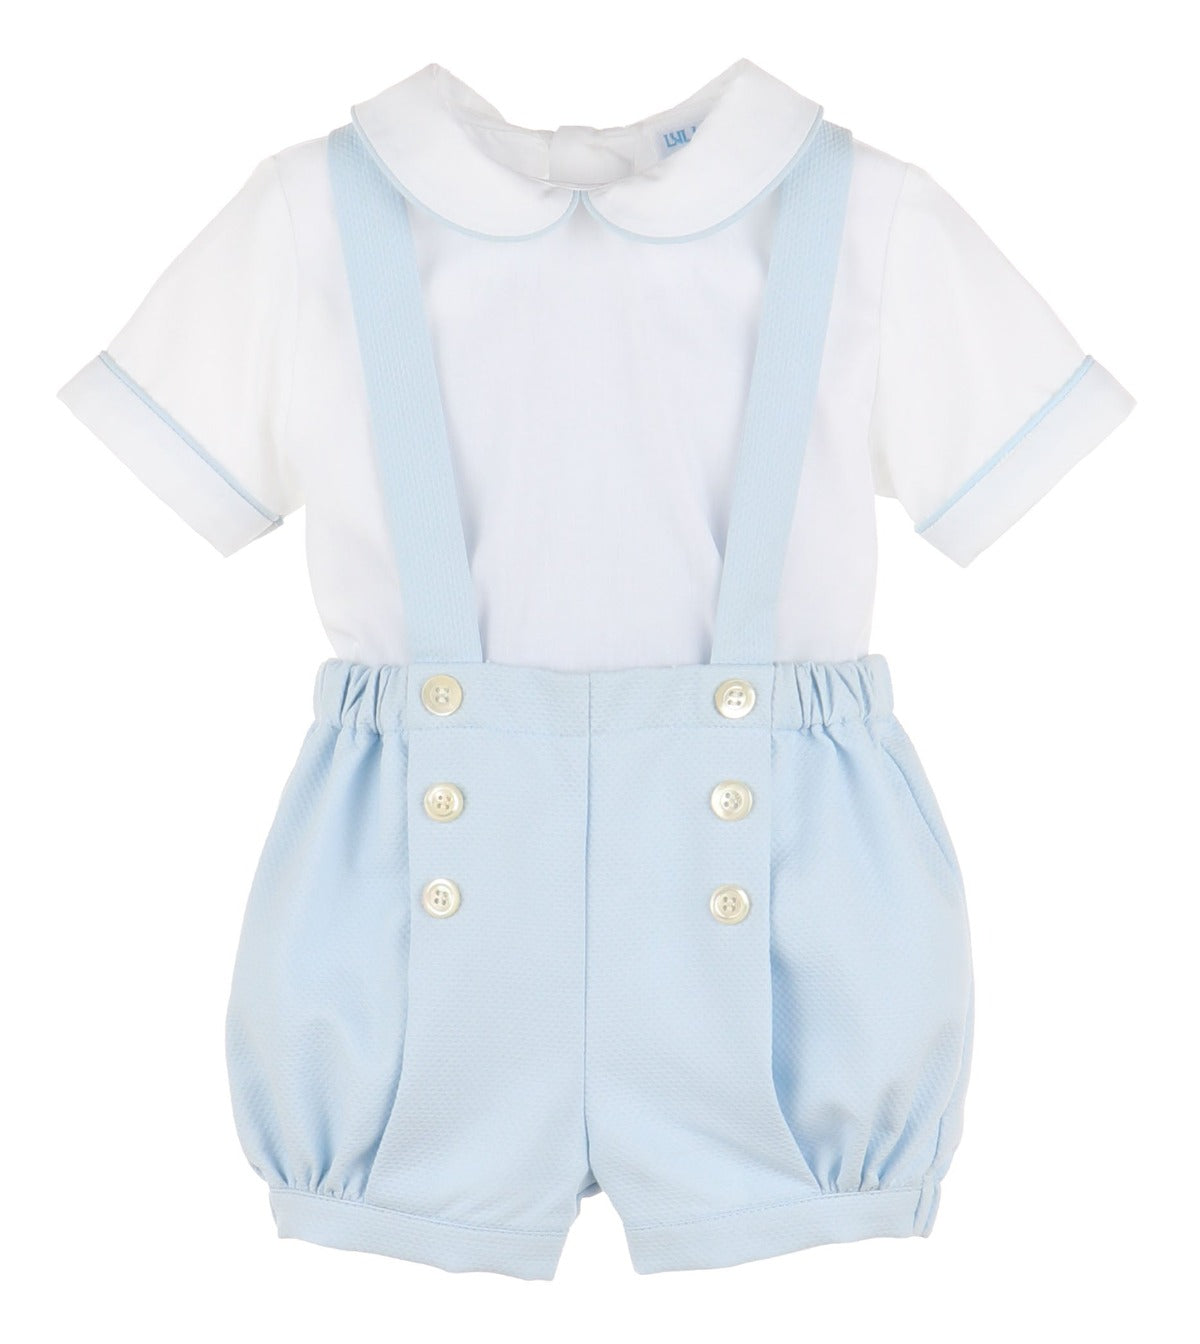 Blue Overall With Short Sleeve White Shirt